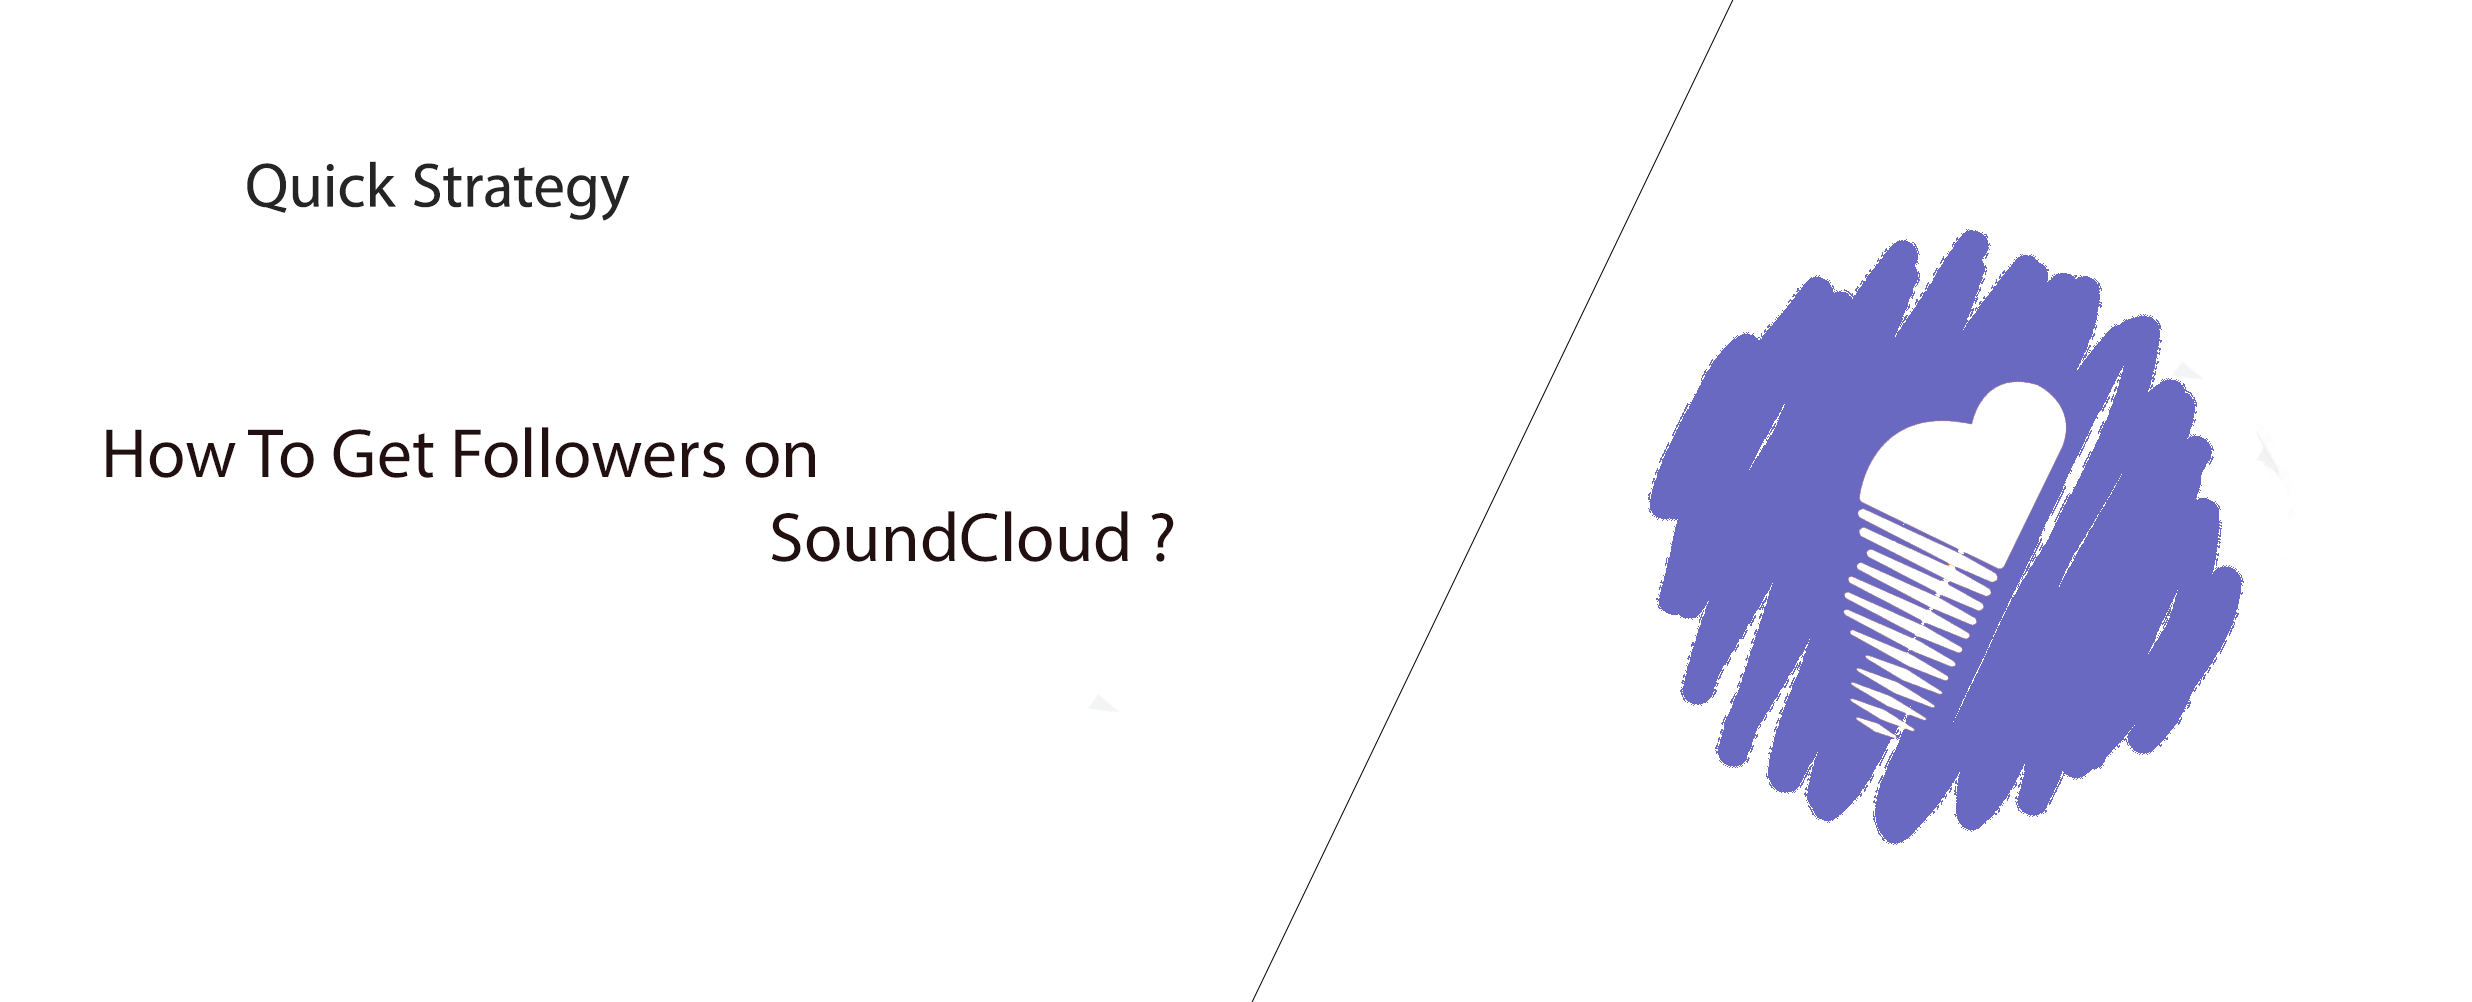 What Are the Best Ways To Buy SoundCloud Followers?